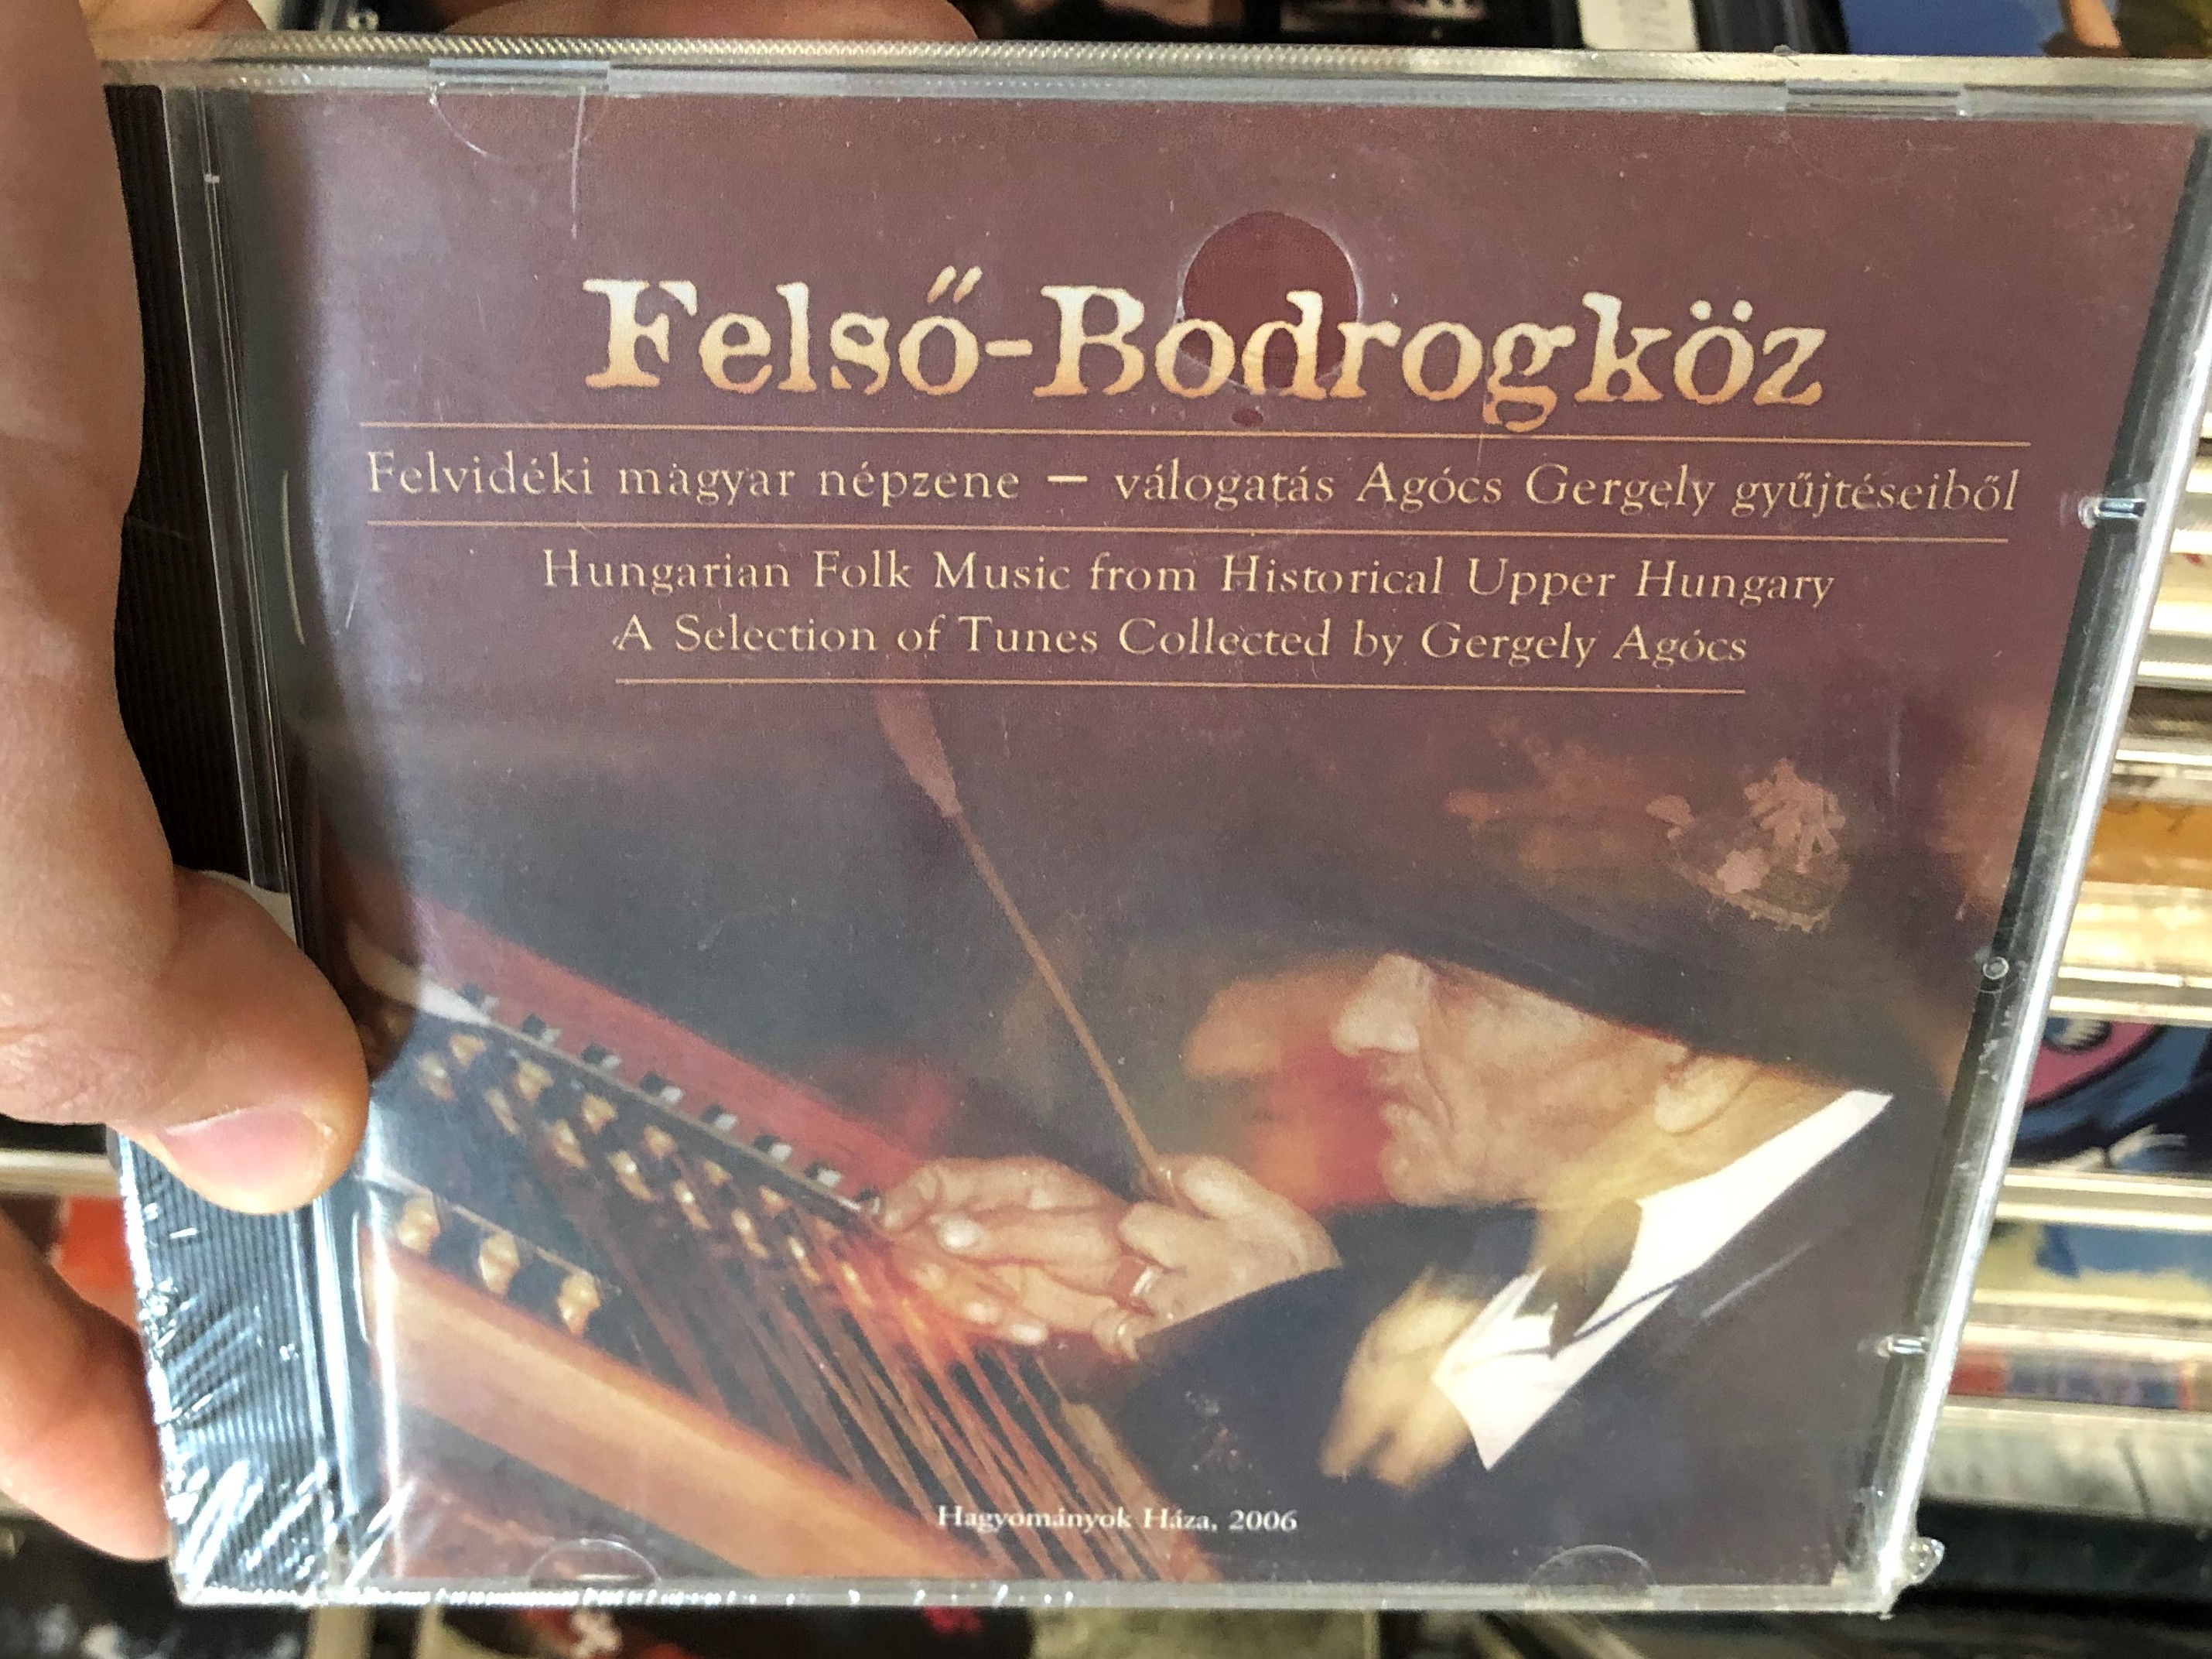 fels-bodrogk-z-hungarian-folk-music-from-historical-upper-hungary-a-selection-of-tunes-collected-by-gergely-ag-cs-hagyom-nyok-h-za-audio-cd-2006-hh-cd-010-1-.jpg